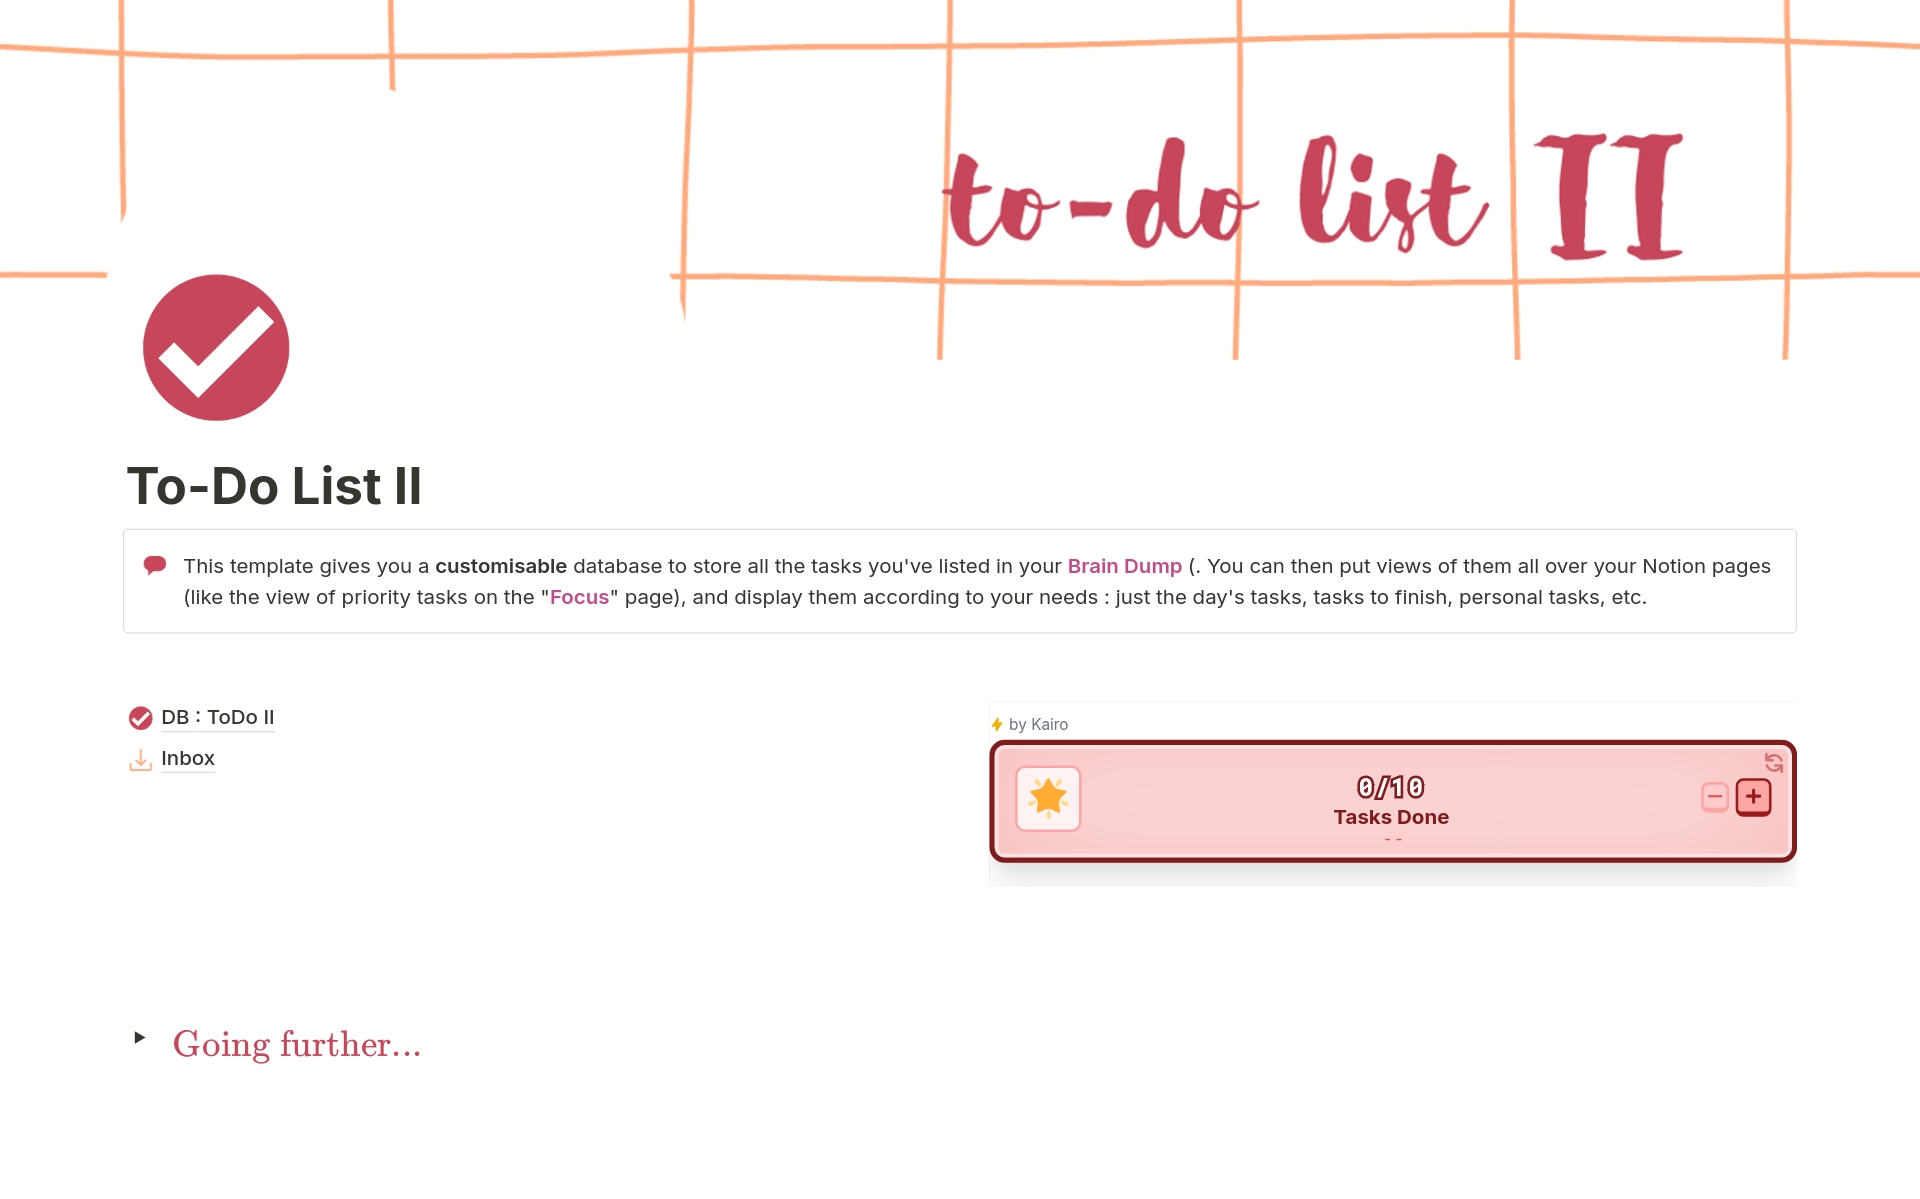 The "Todo List II" is a database that centralises all your tasks, appointments, things to remember and responsibilities. It allows you to organise them by week, date, level of urgency and status. It's both simple and incredibly effective